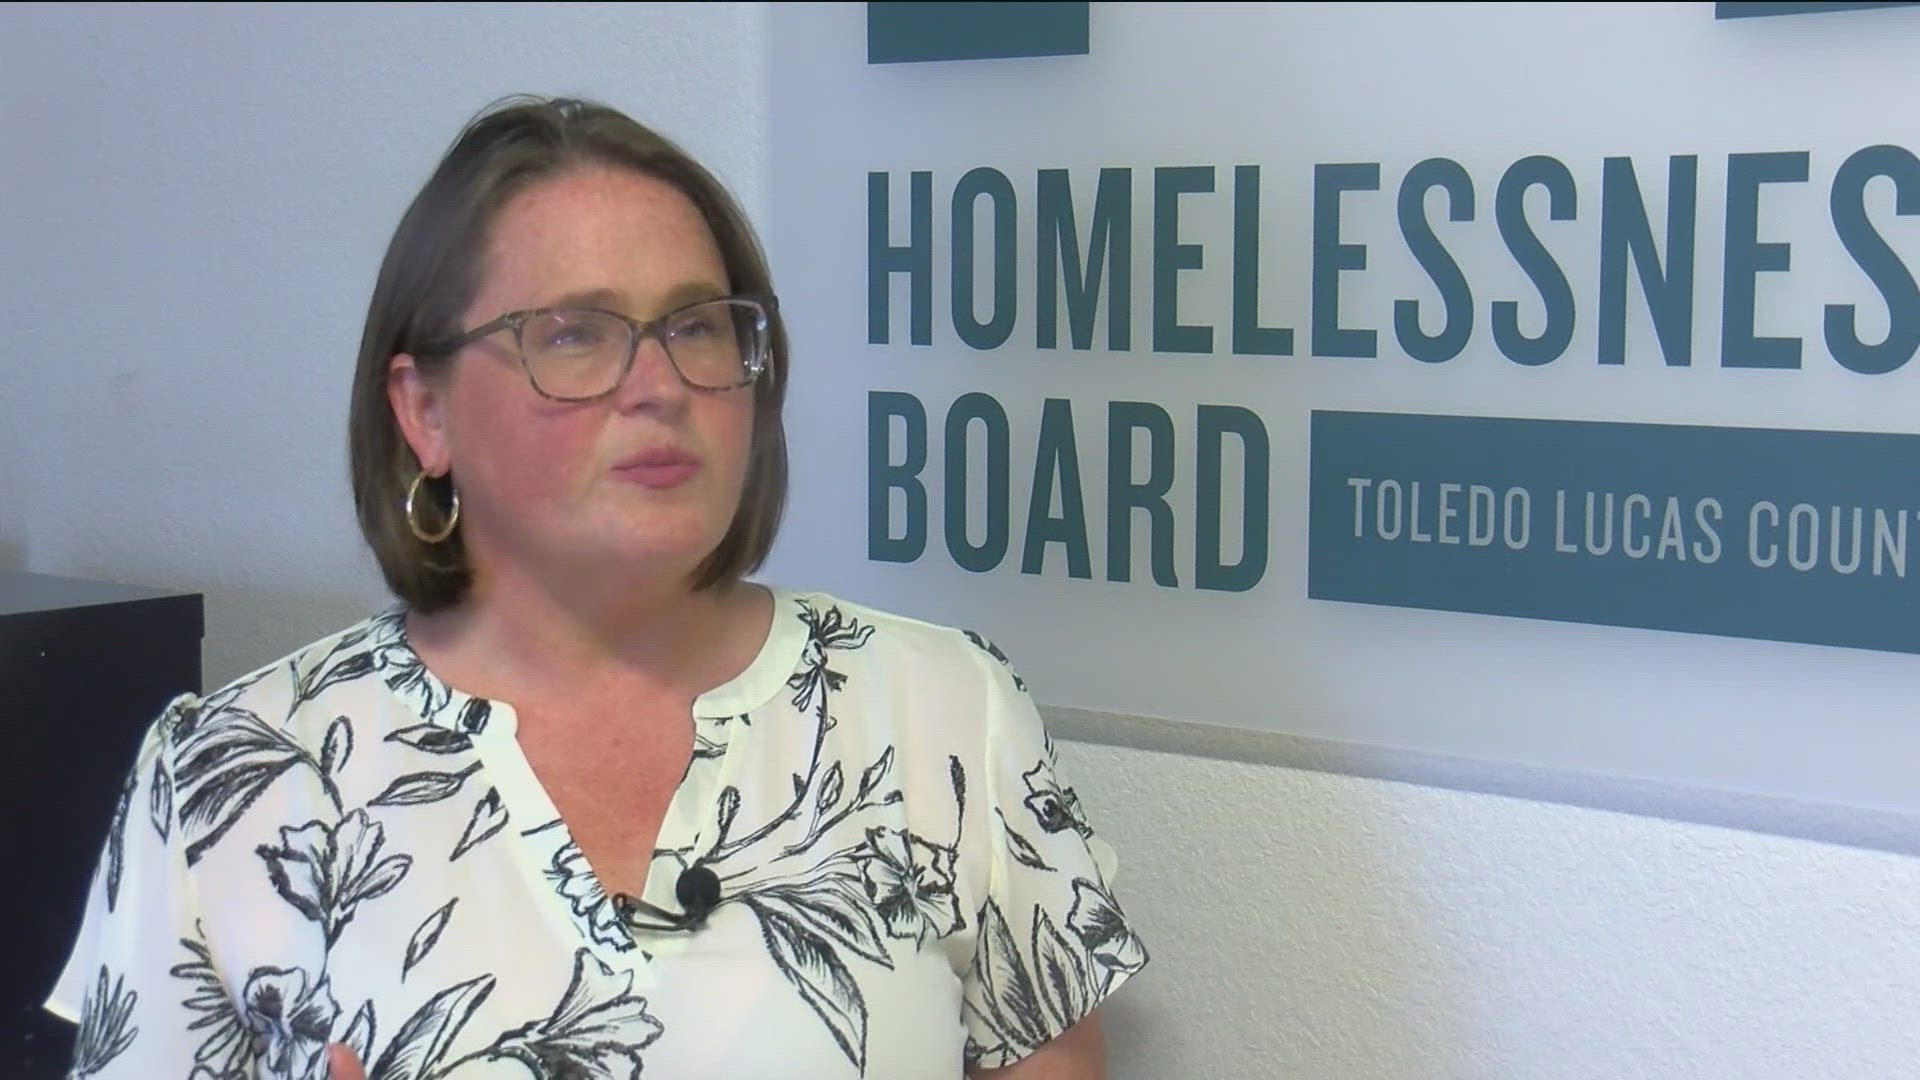 The Toledo Lucas County Homelessness Board helps coordinate services for organizations across the county that help homeless people.